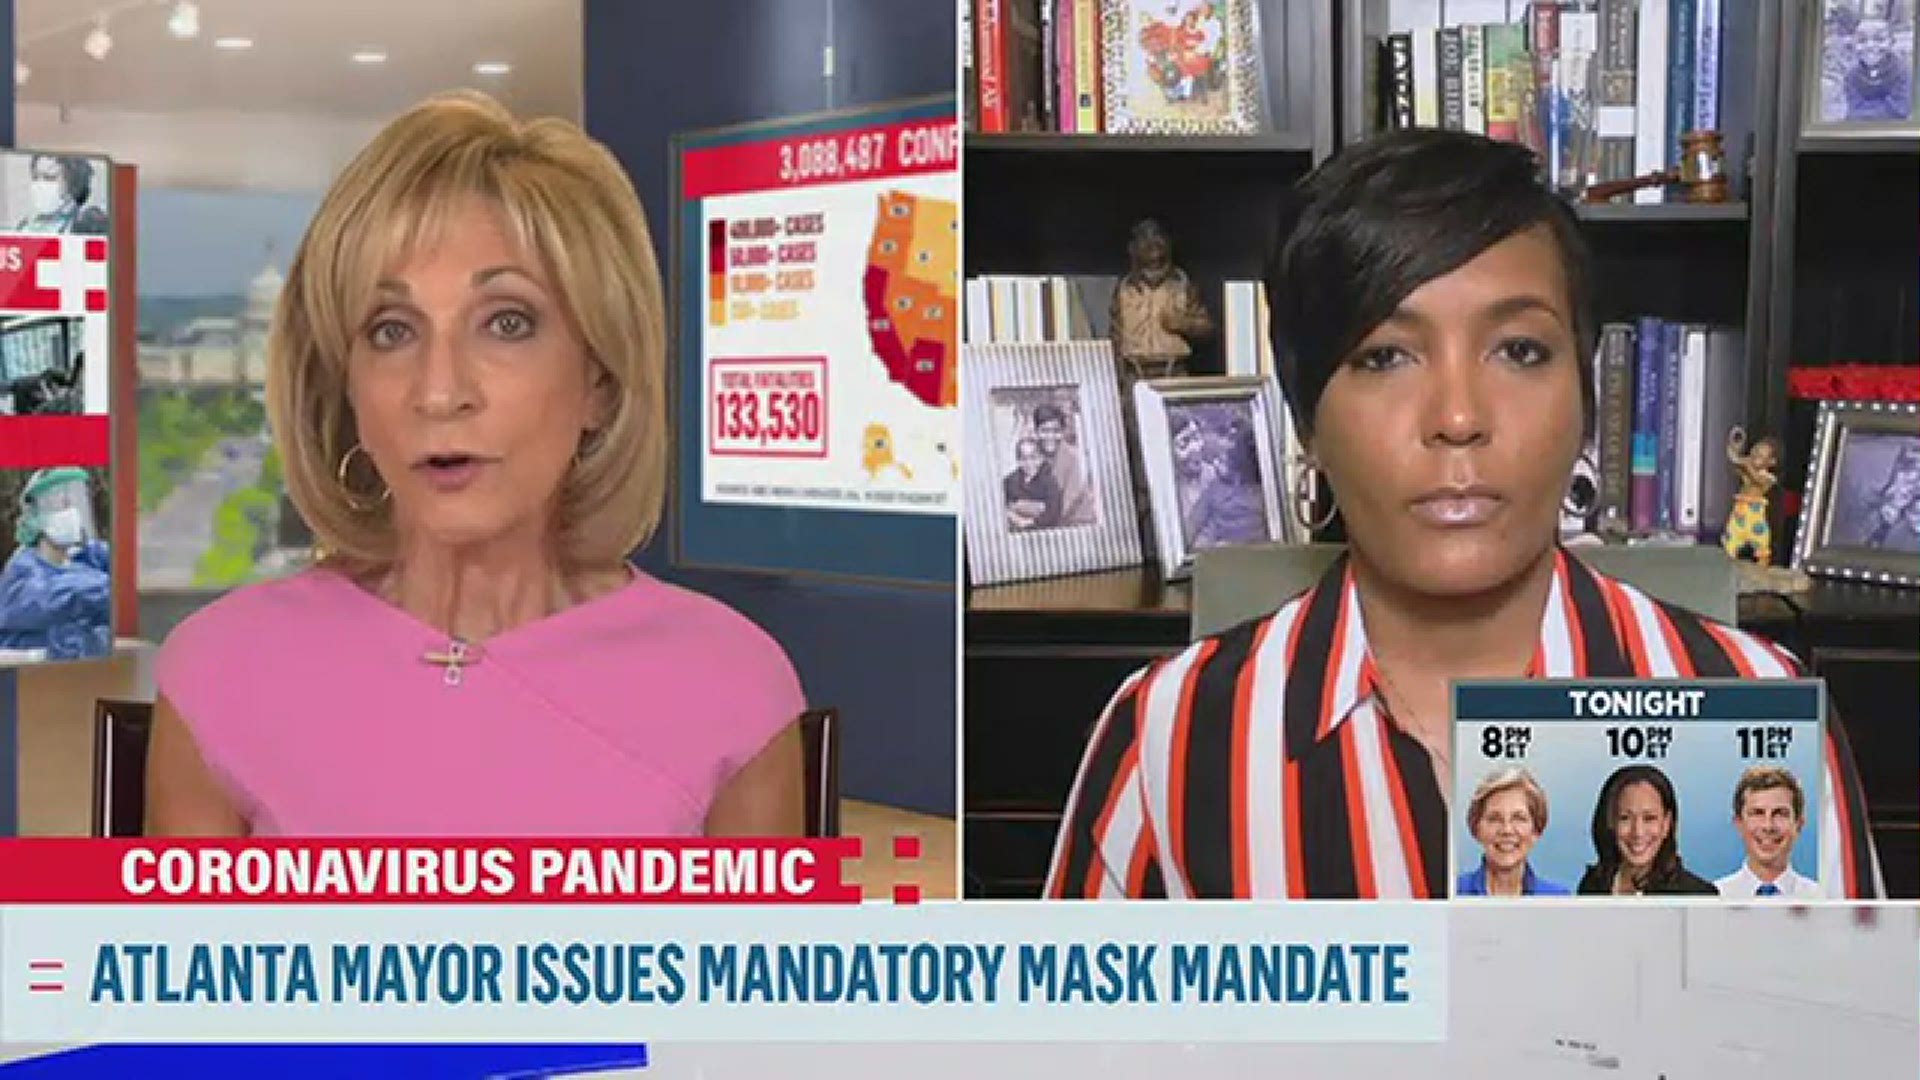 Mayor Keisha Lance Bottoms talked about her COVID-19 diagnosis, the mask mandate, Kemp's leadership, and other topics in an interview with MSNBC's Andrea Mitchell.